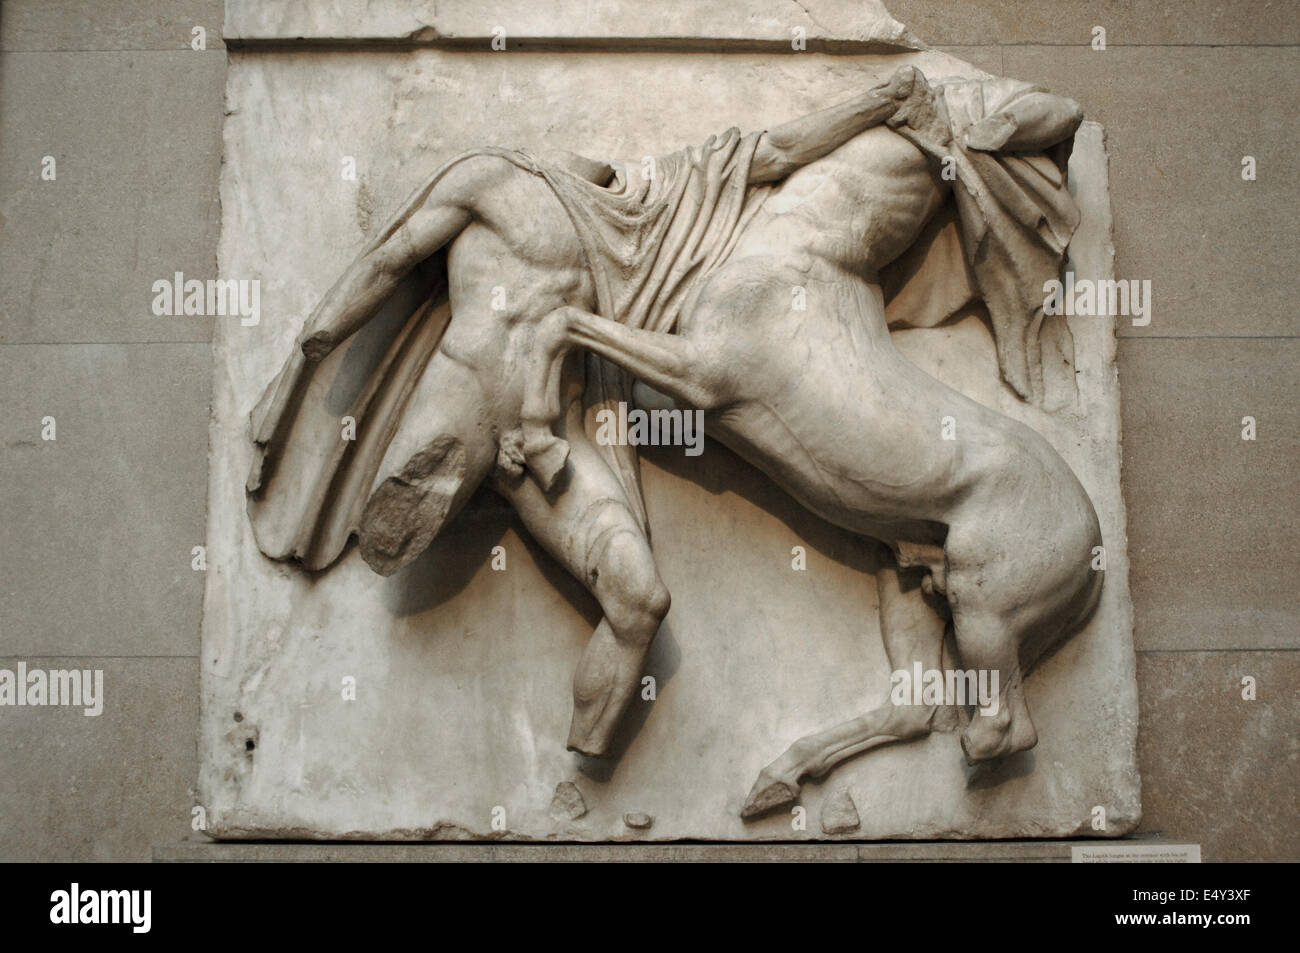 Metope VII from the Parthenon marbles depicting part of the battle between the Centaurs and the Lapiths. 5th century BC. Athens. Stock Photo